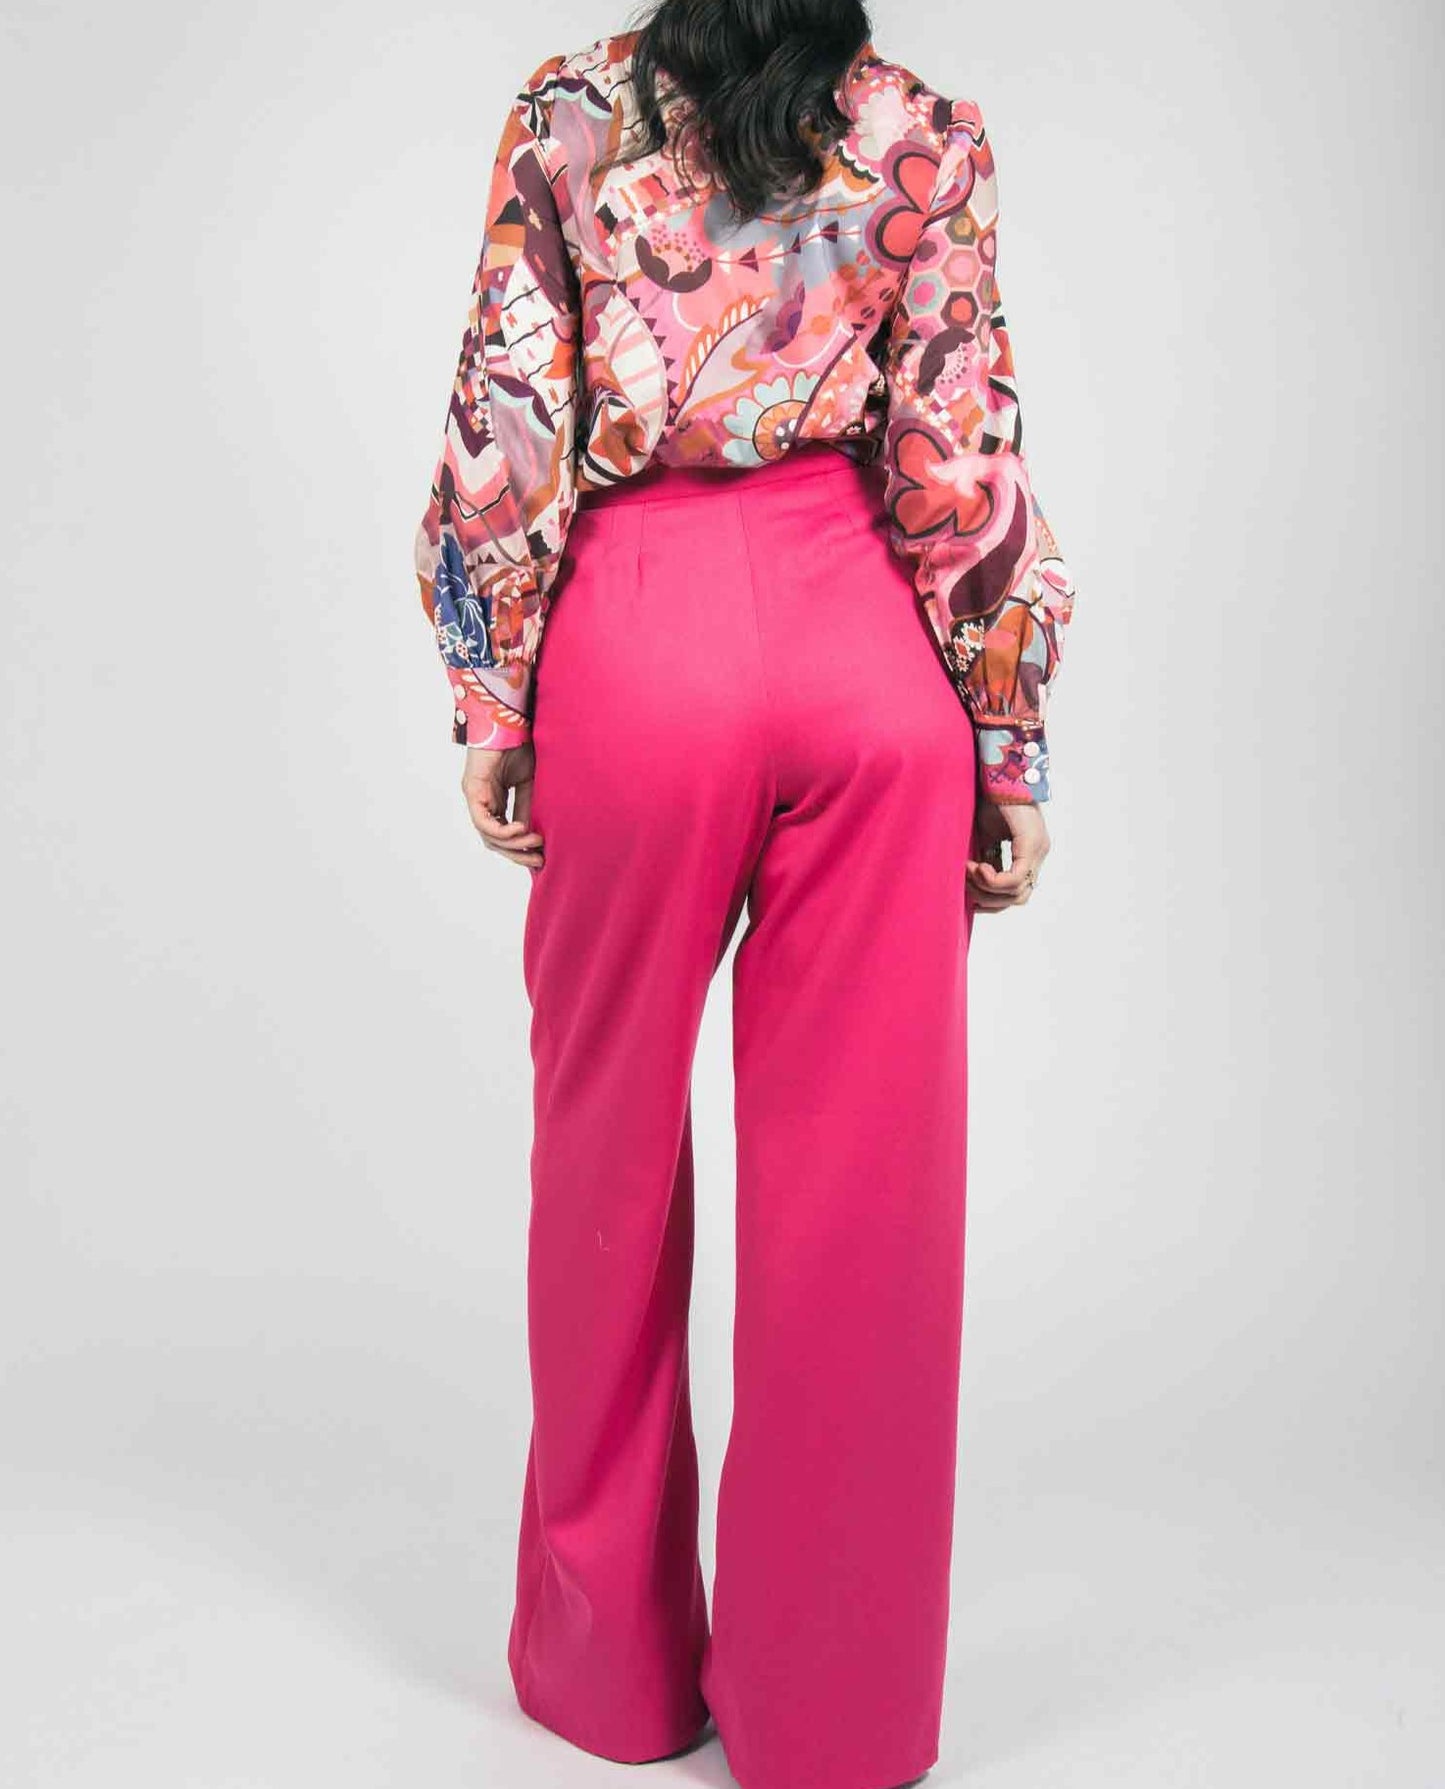 70s style fashion with pink vintage inspired print made in ireland office fashion